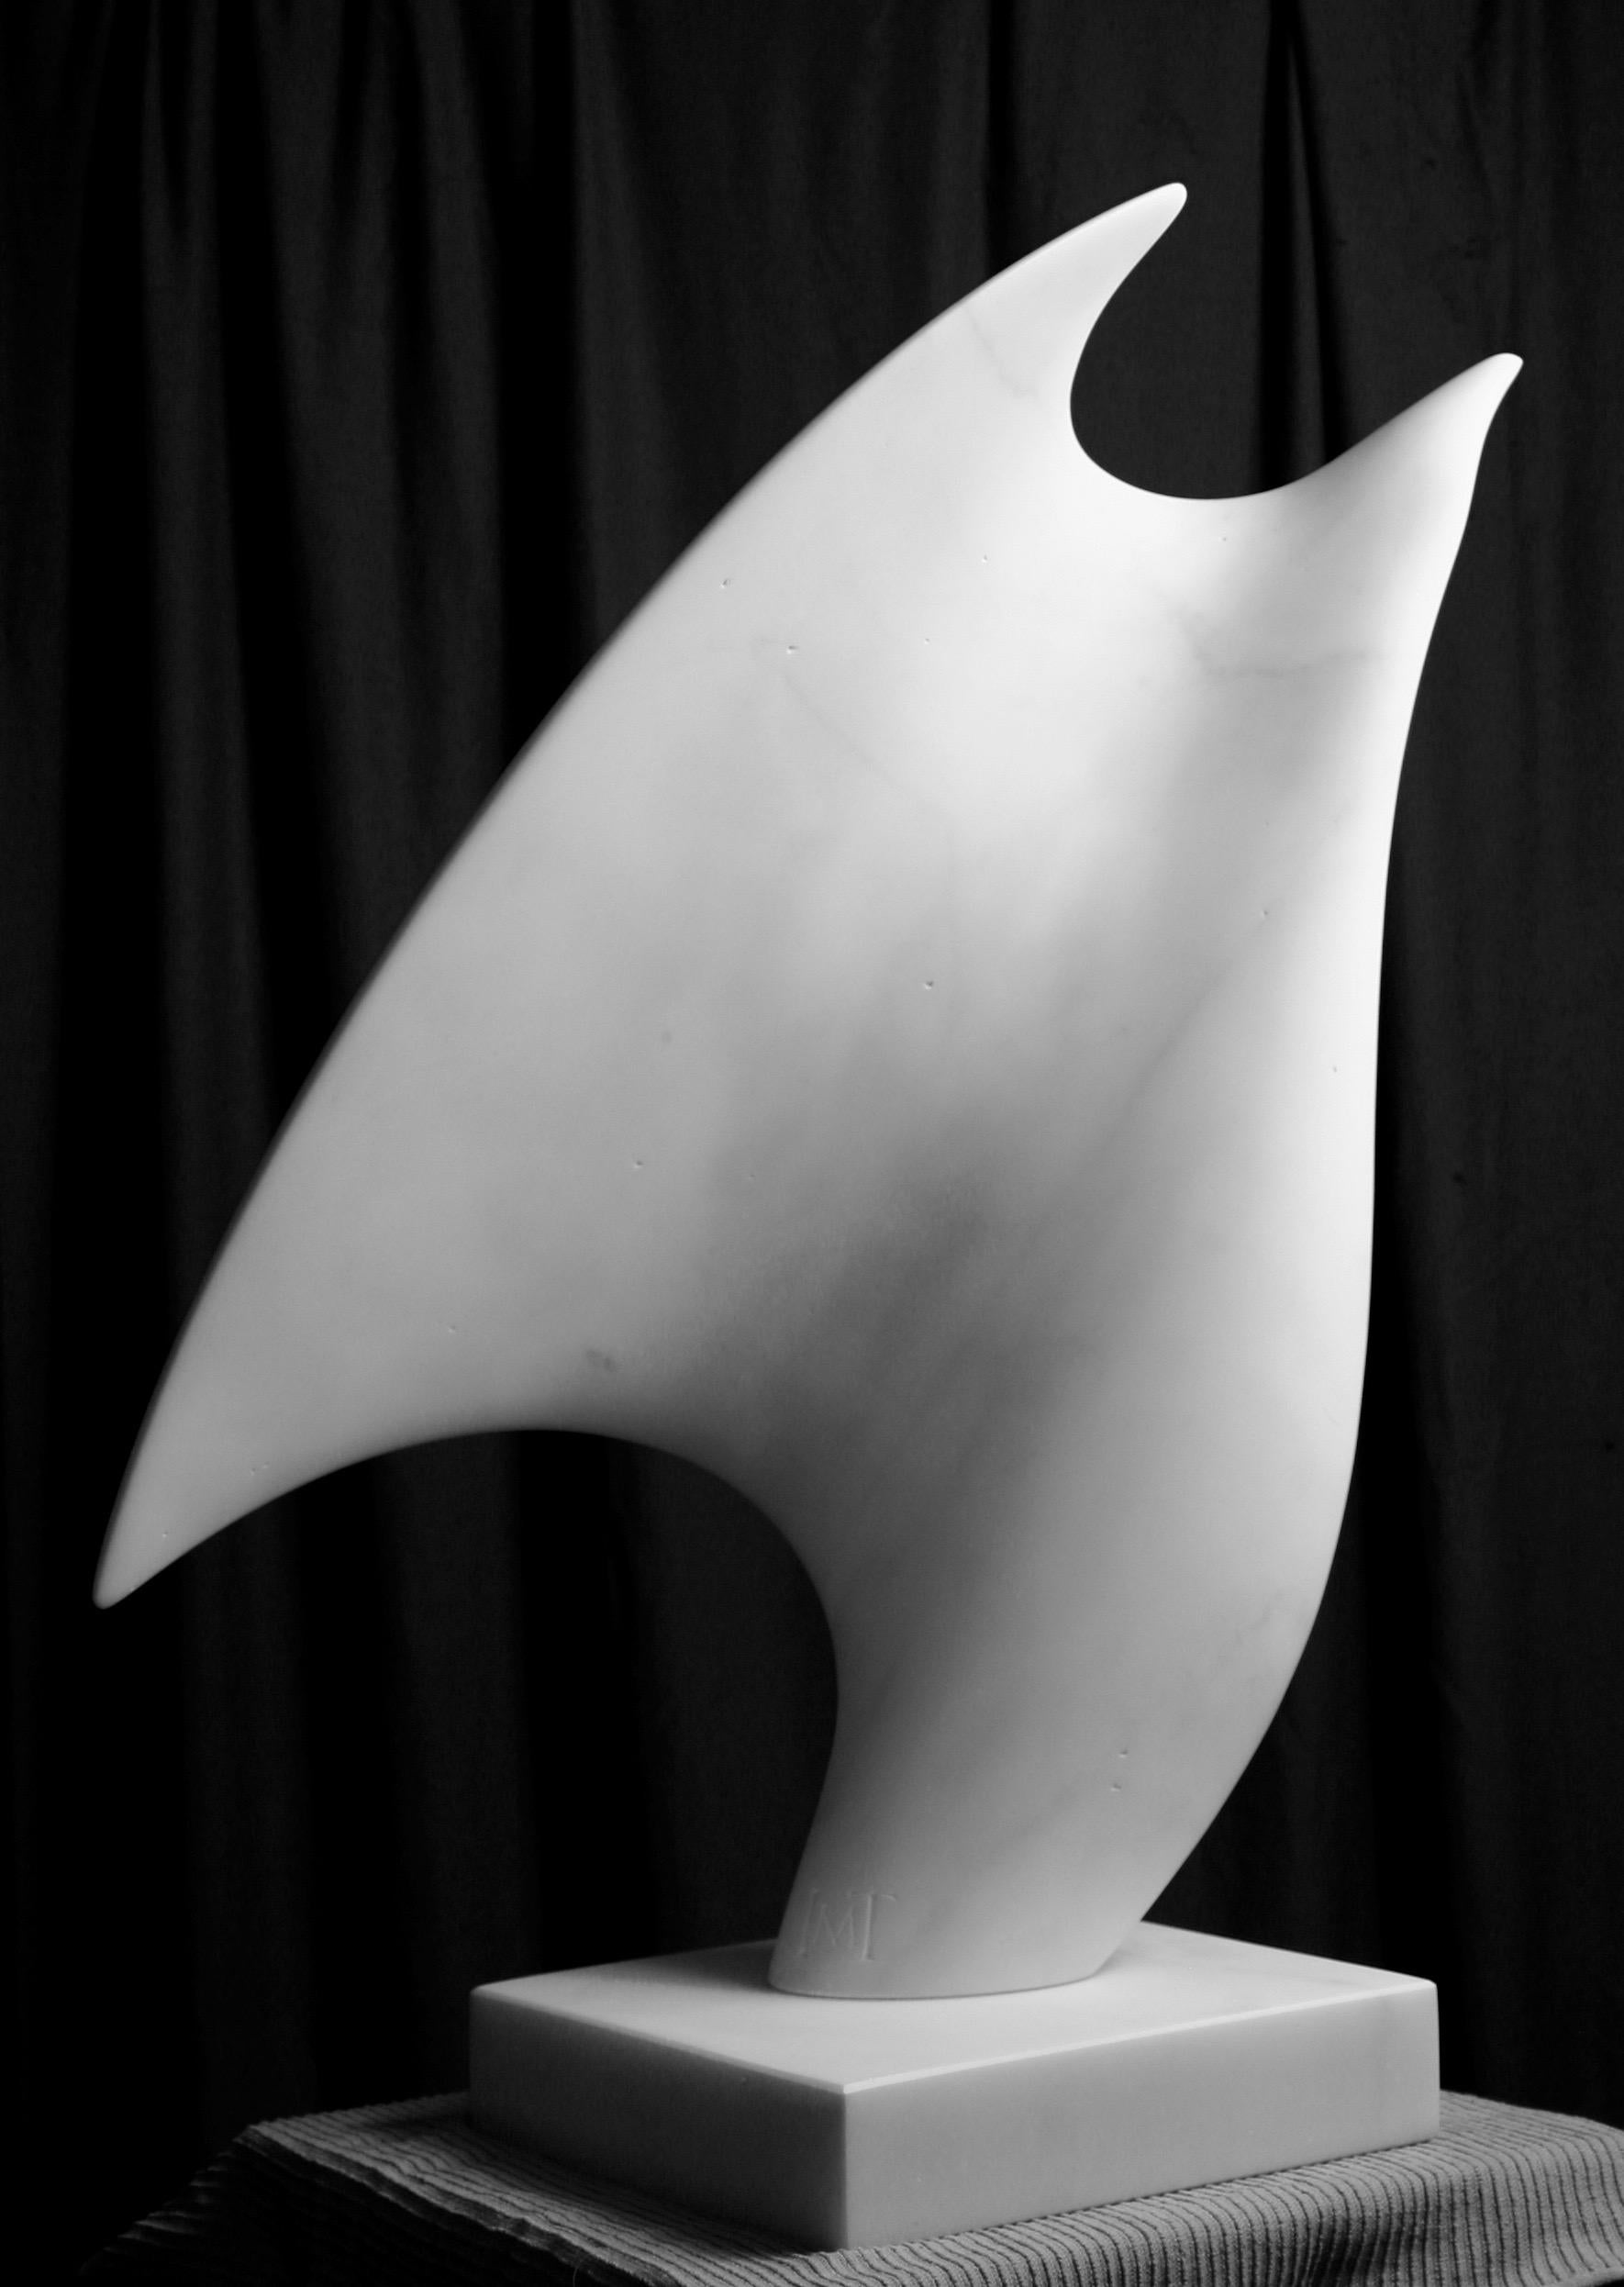 Becoming -British Sculptor, Abstract, Marble, Italian Carrara, Philosophy, veins - Sculpture by Ian Thomson